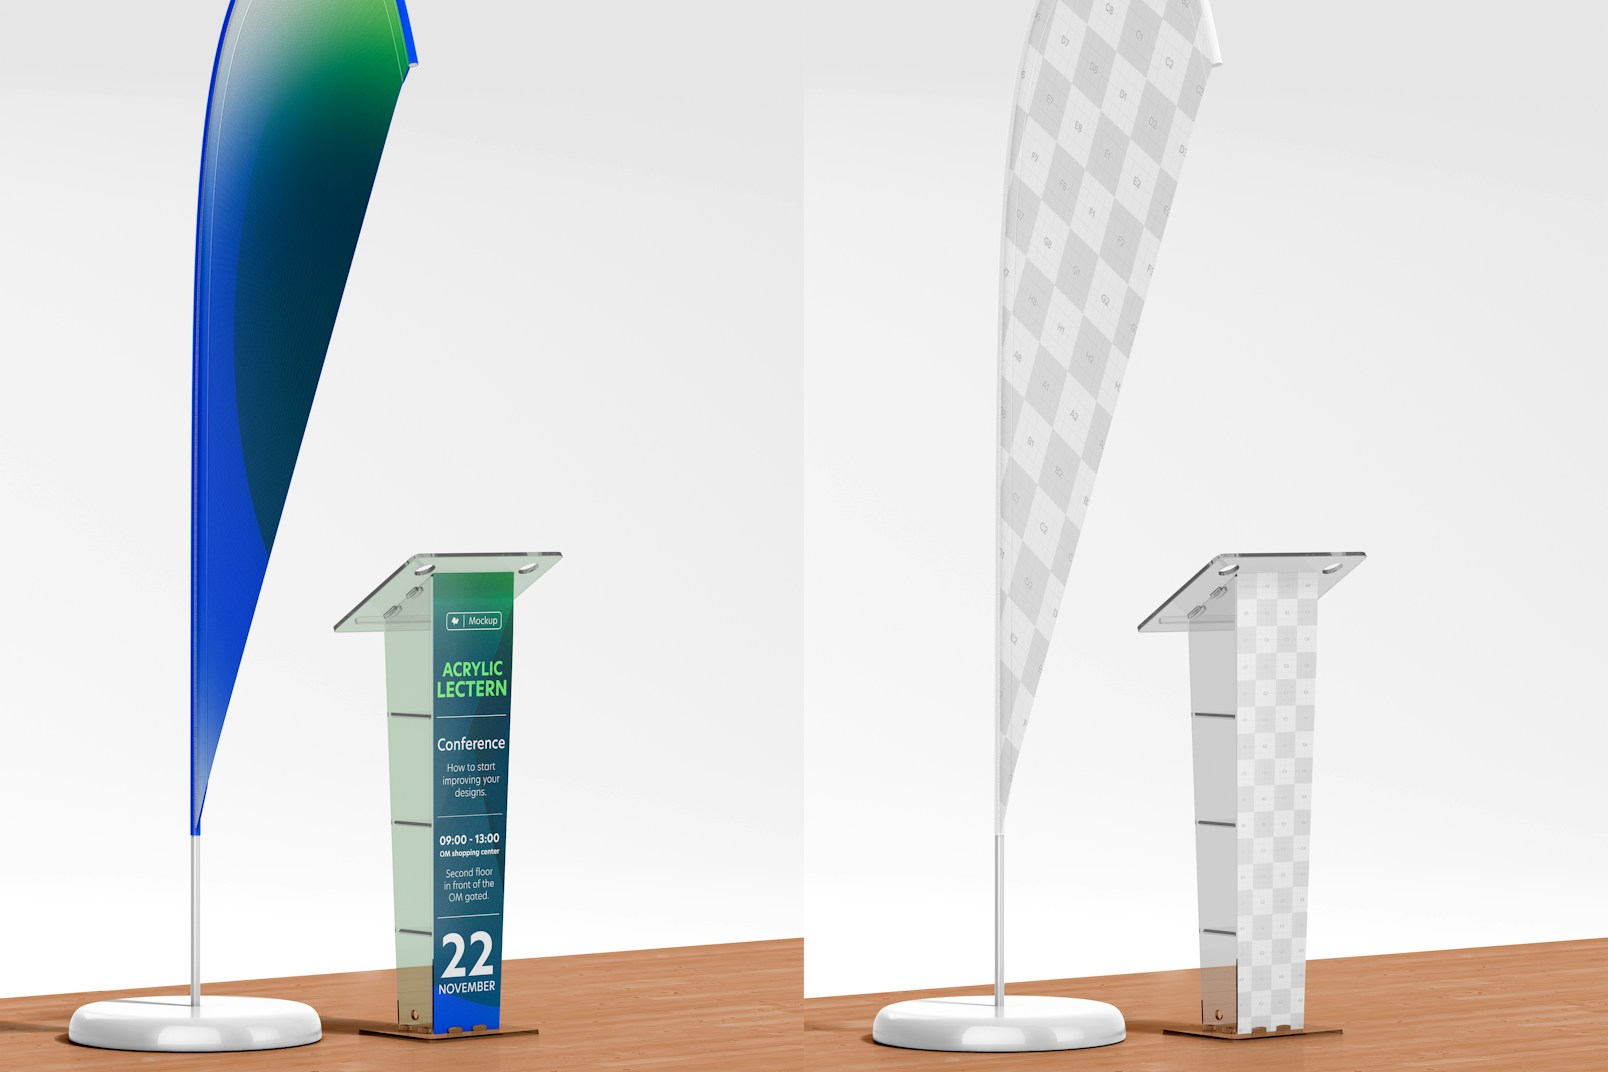 Acrylic Lectern with Banner Mockup